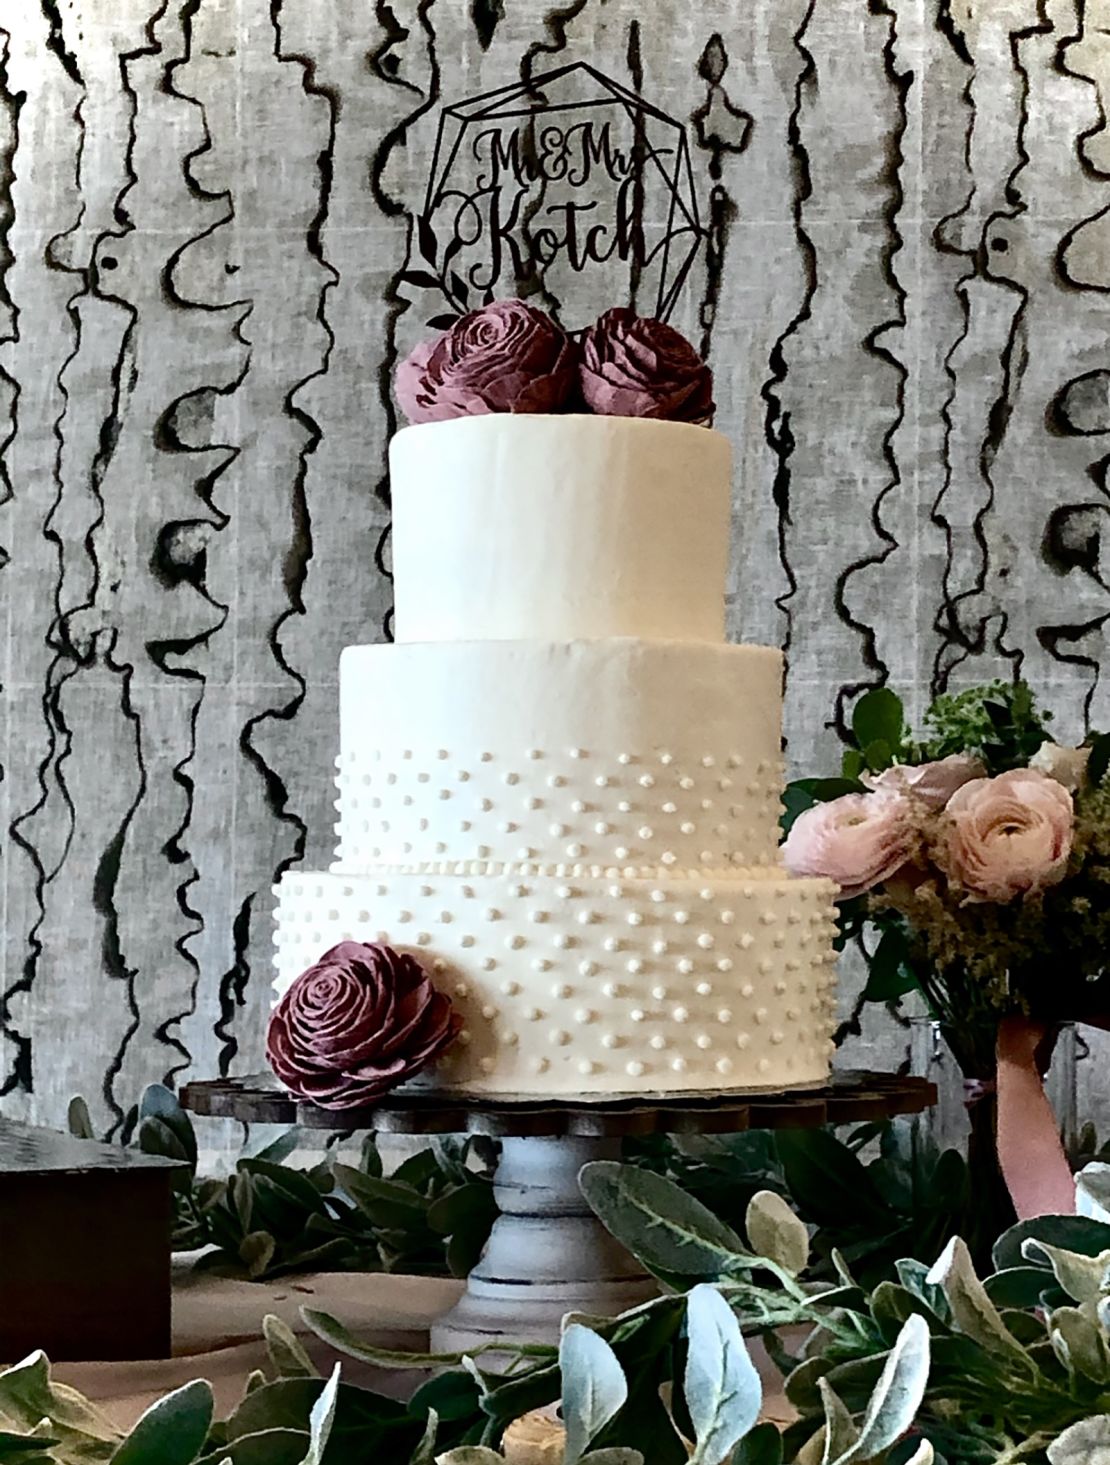 Alyssa Young, the owner of Cake Llama in Texas, has had to diversify her business away from the wedding industry. "We've had to try other things," she said.